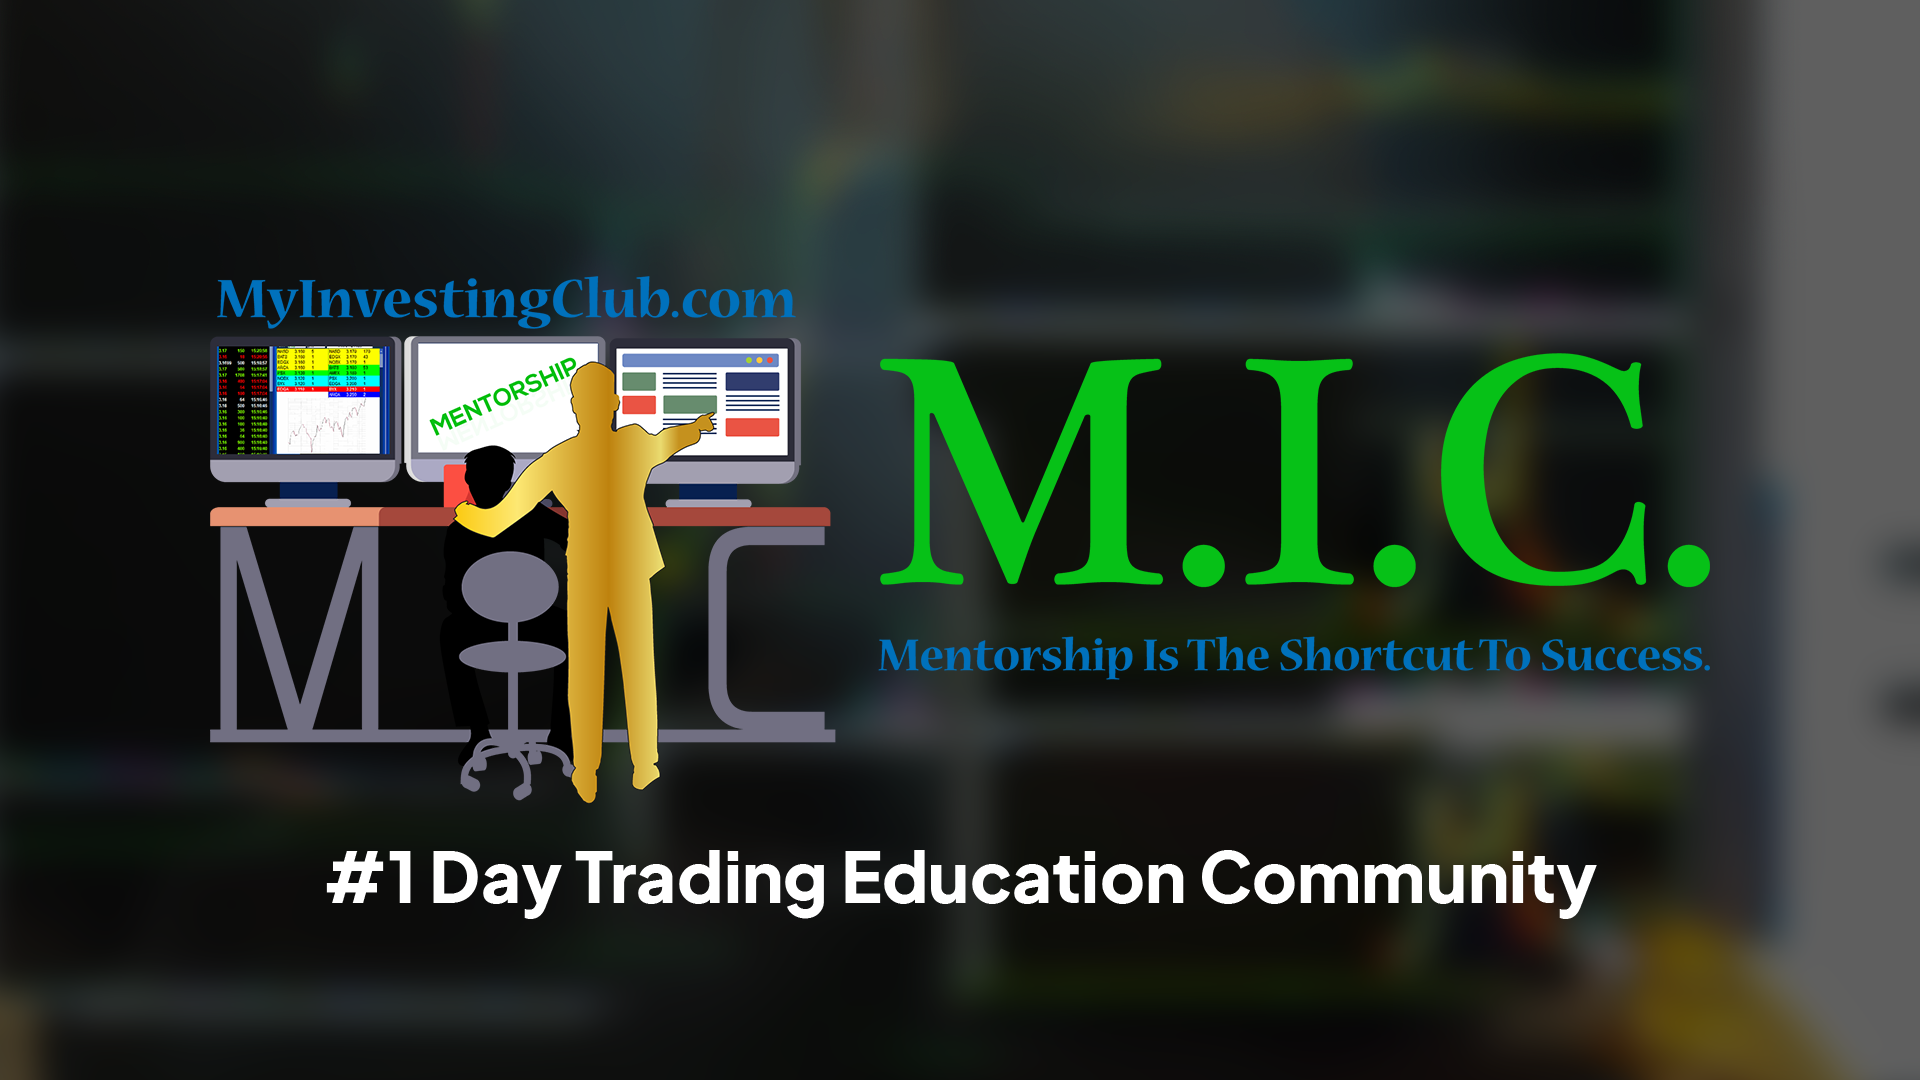 Get The Best Tape Reading Training For New Day Traders With This Mentor Program